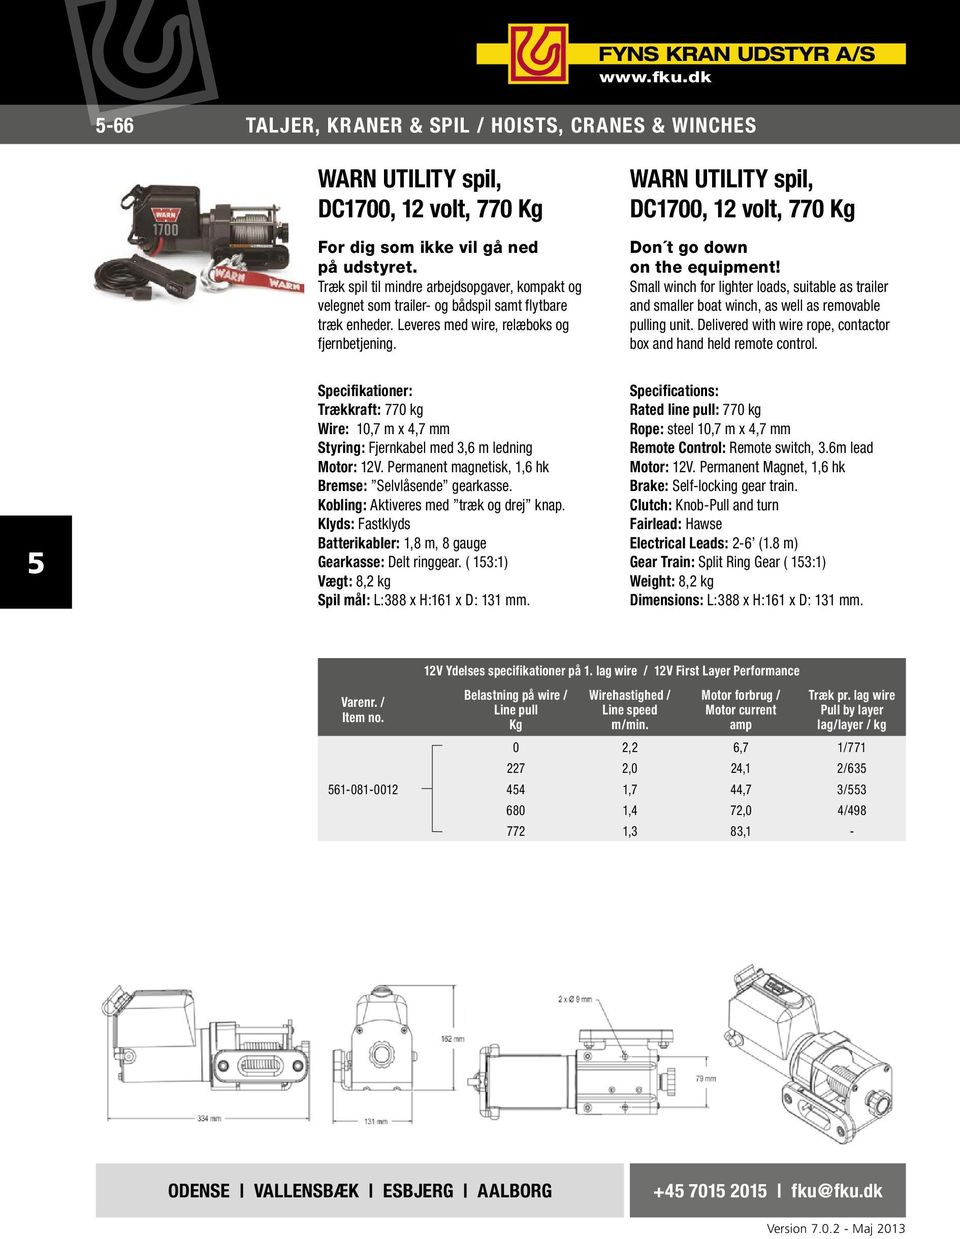 WARN UTILITY spil, DC1700, 12 volt, 770 Don t go down on the equipment! Small winch for lighter loads, suitable as trailer and smaller boat winch, as well as removable pulling unit.